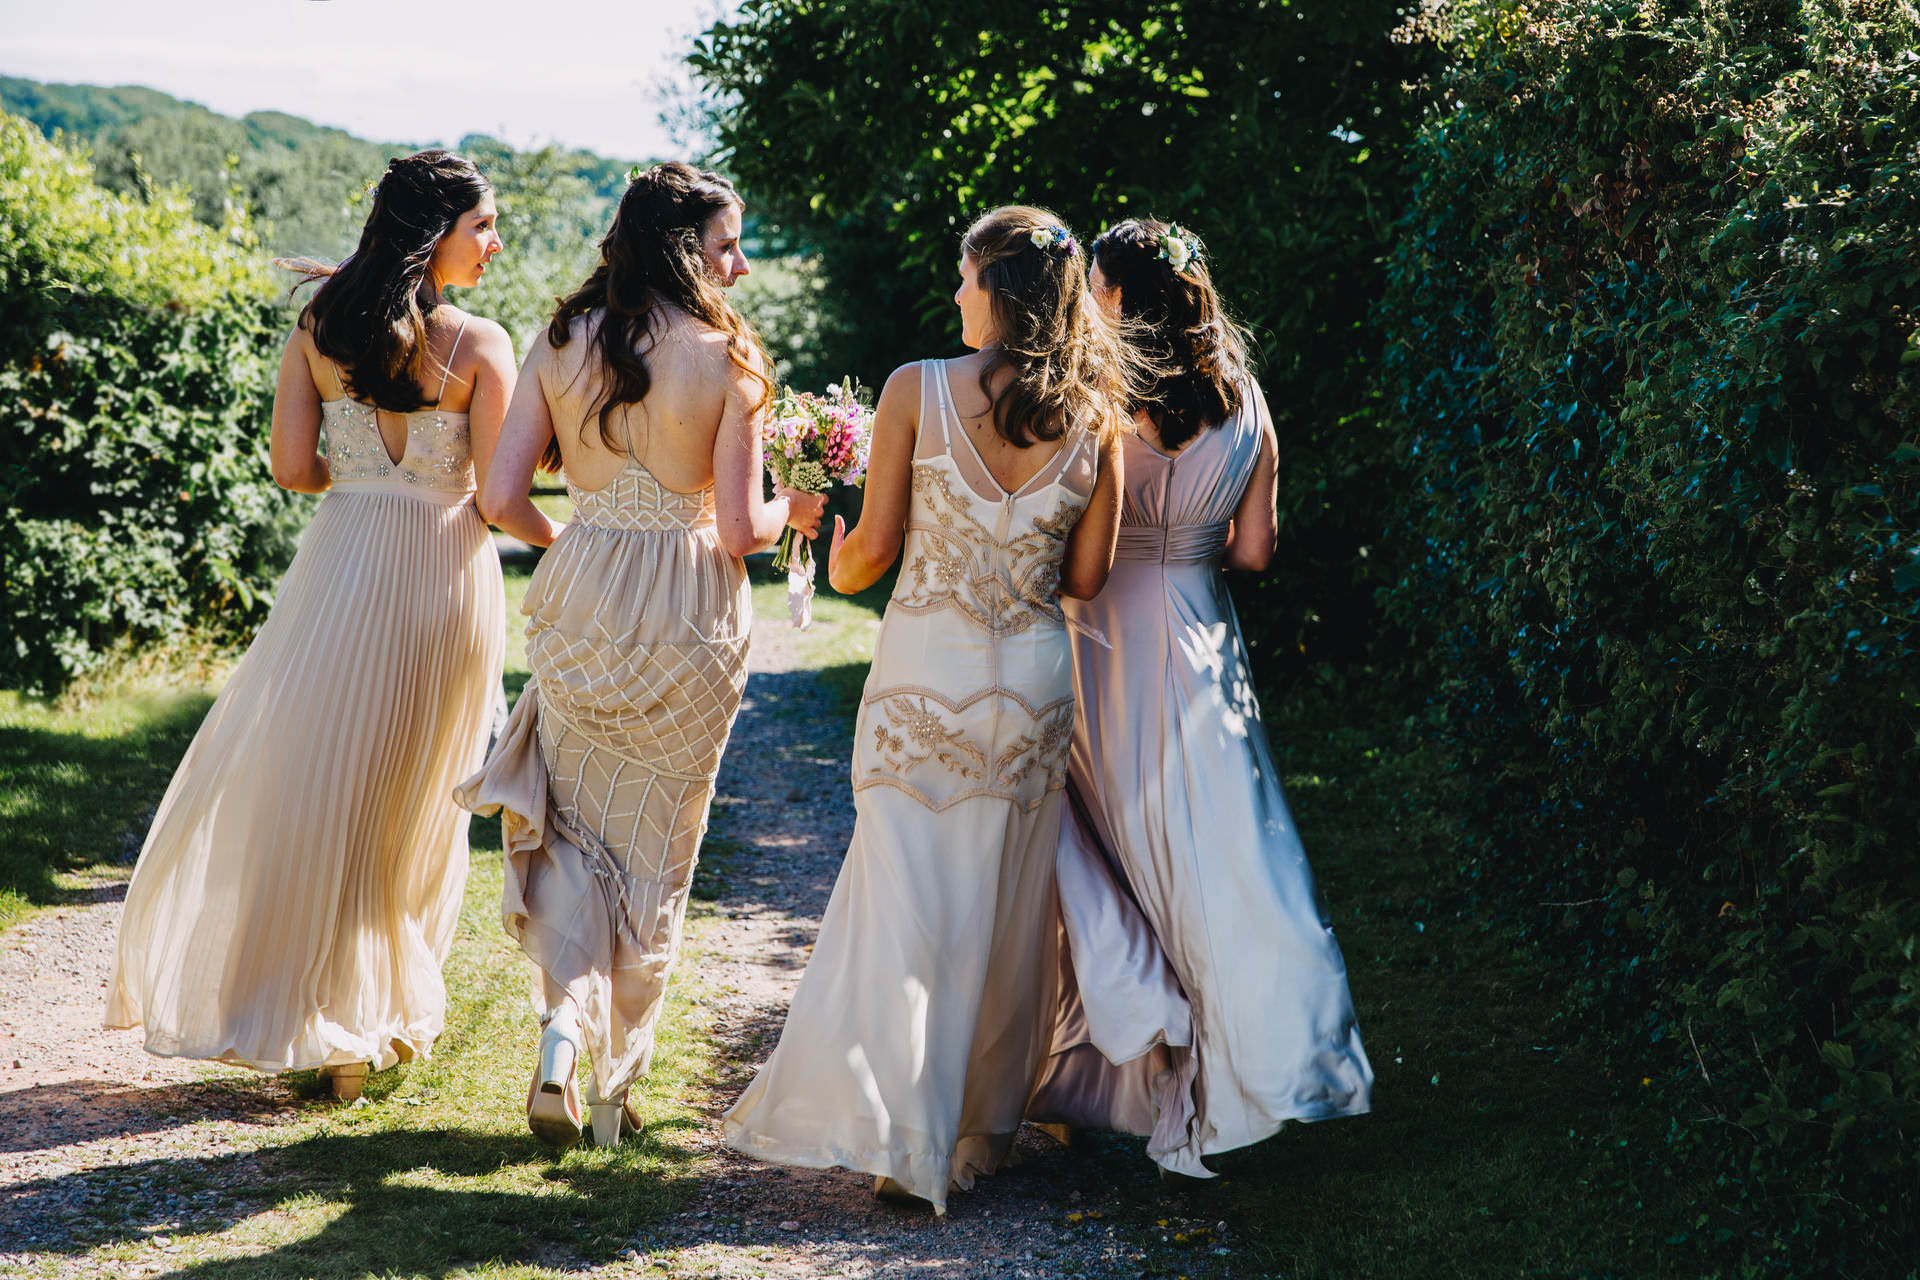 Groups_Lucy Judson Photography, Oxford wedding photographer